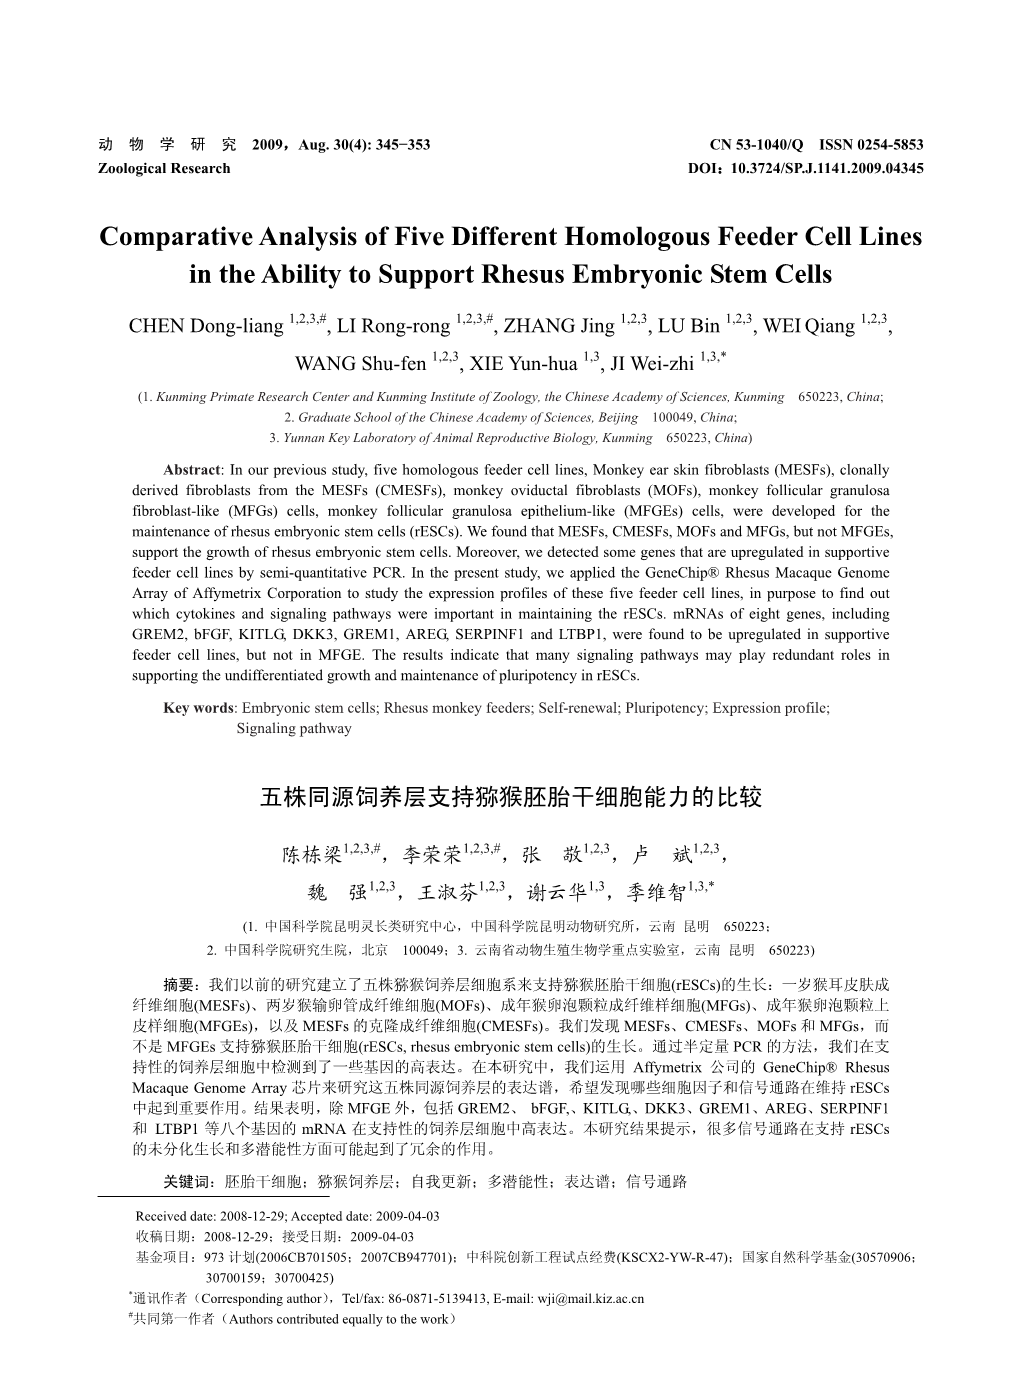 Comparative Analysis of Five Different Homologous Feeder Cell Lines in the Ability to Support Rhesus Embryonic Stem Cells